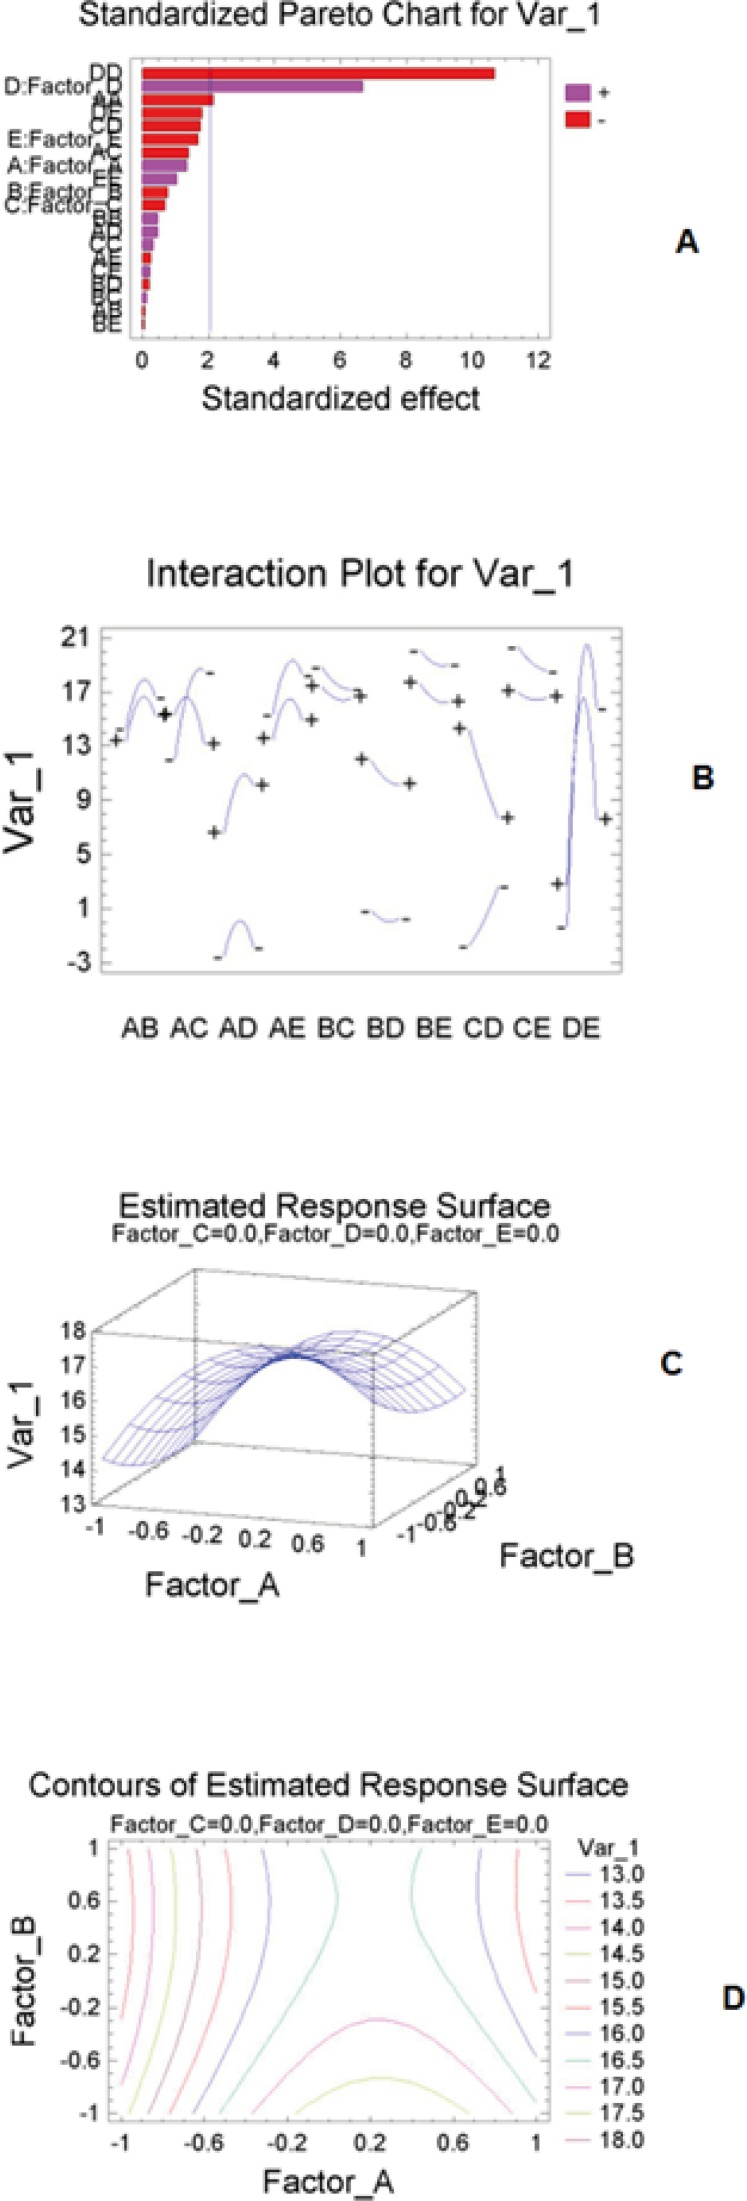 (A) Pareto chart of the main effects for chromatography method; (B) interaction plot; (C) estimated response surface; and (D) contours plot obtained